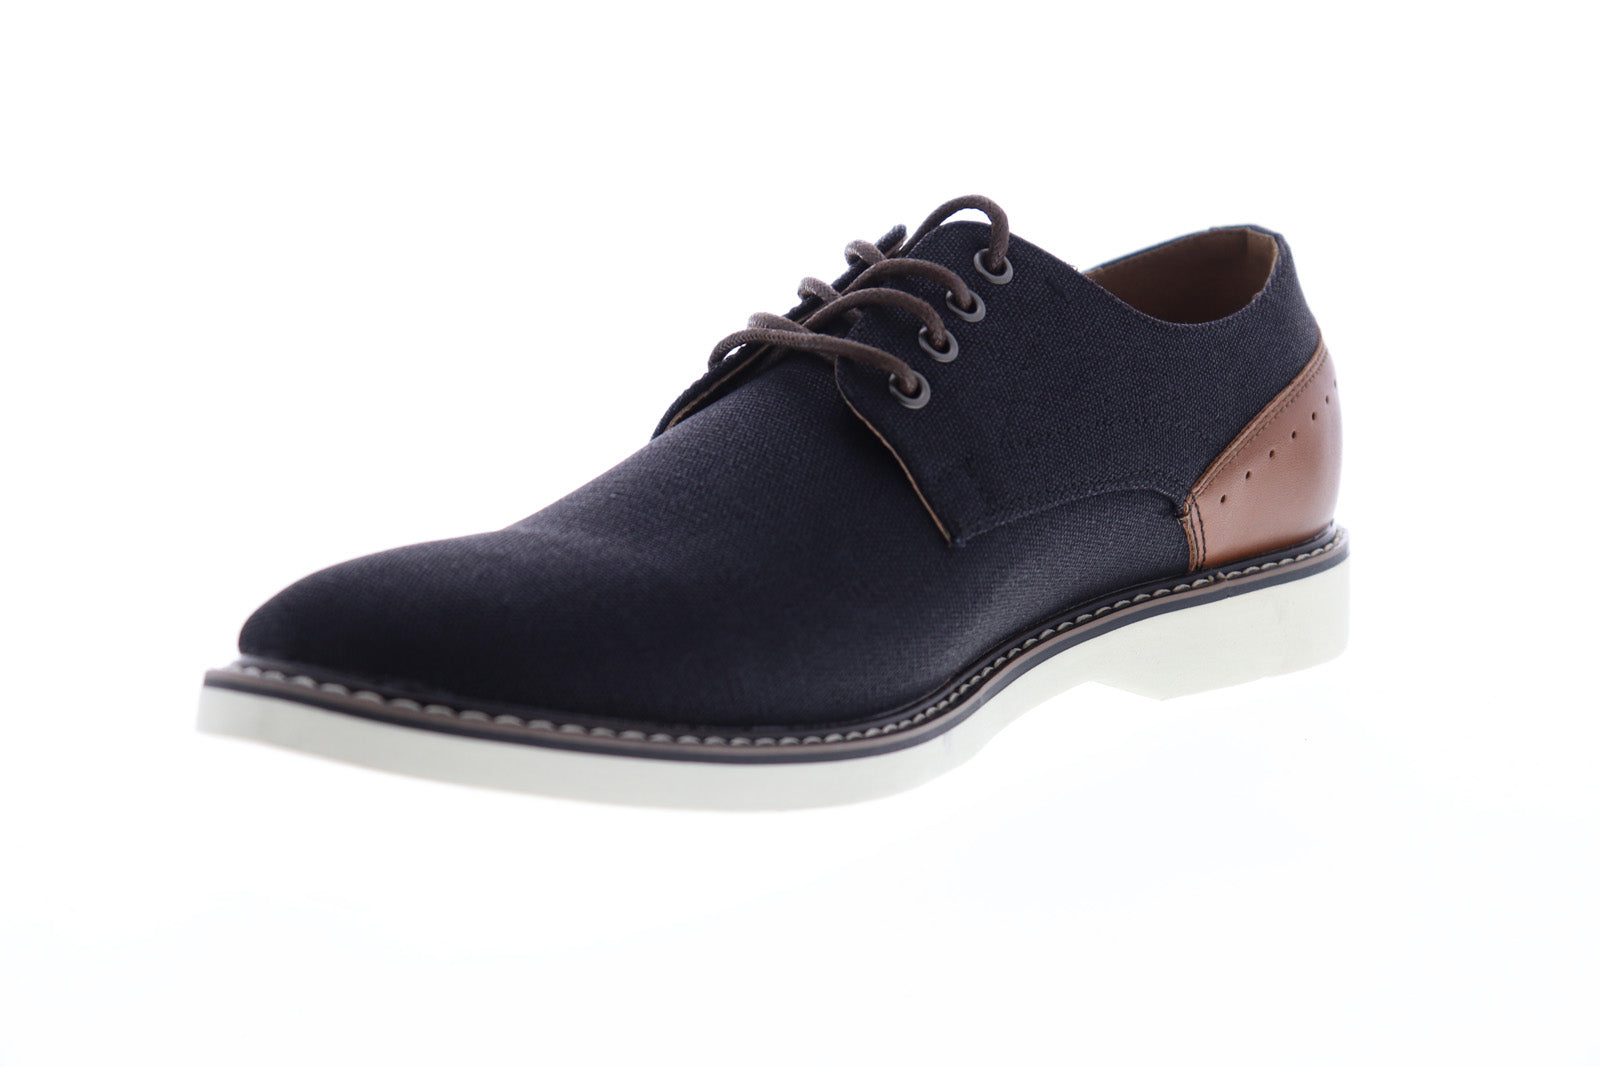 CUSTOMMOOD Montana Lace-Up Vibram Sole Derby Shoes_Keep Black by W Concept